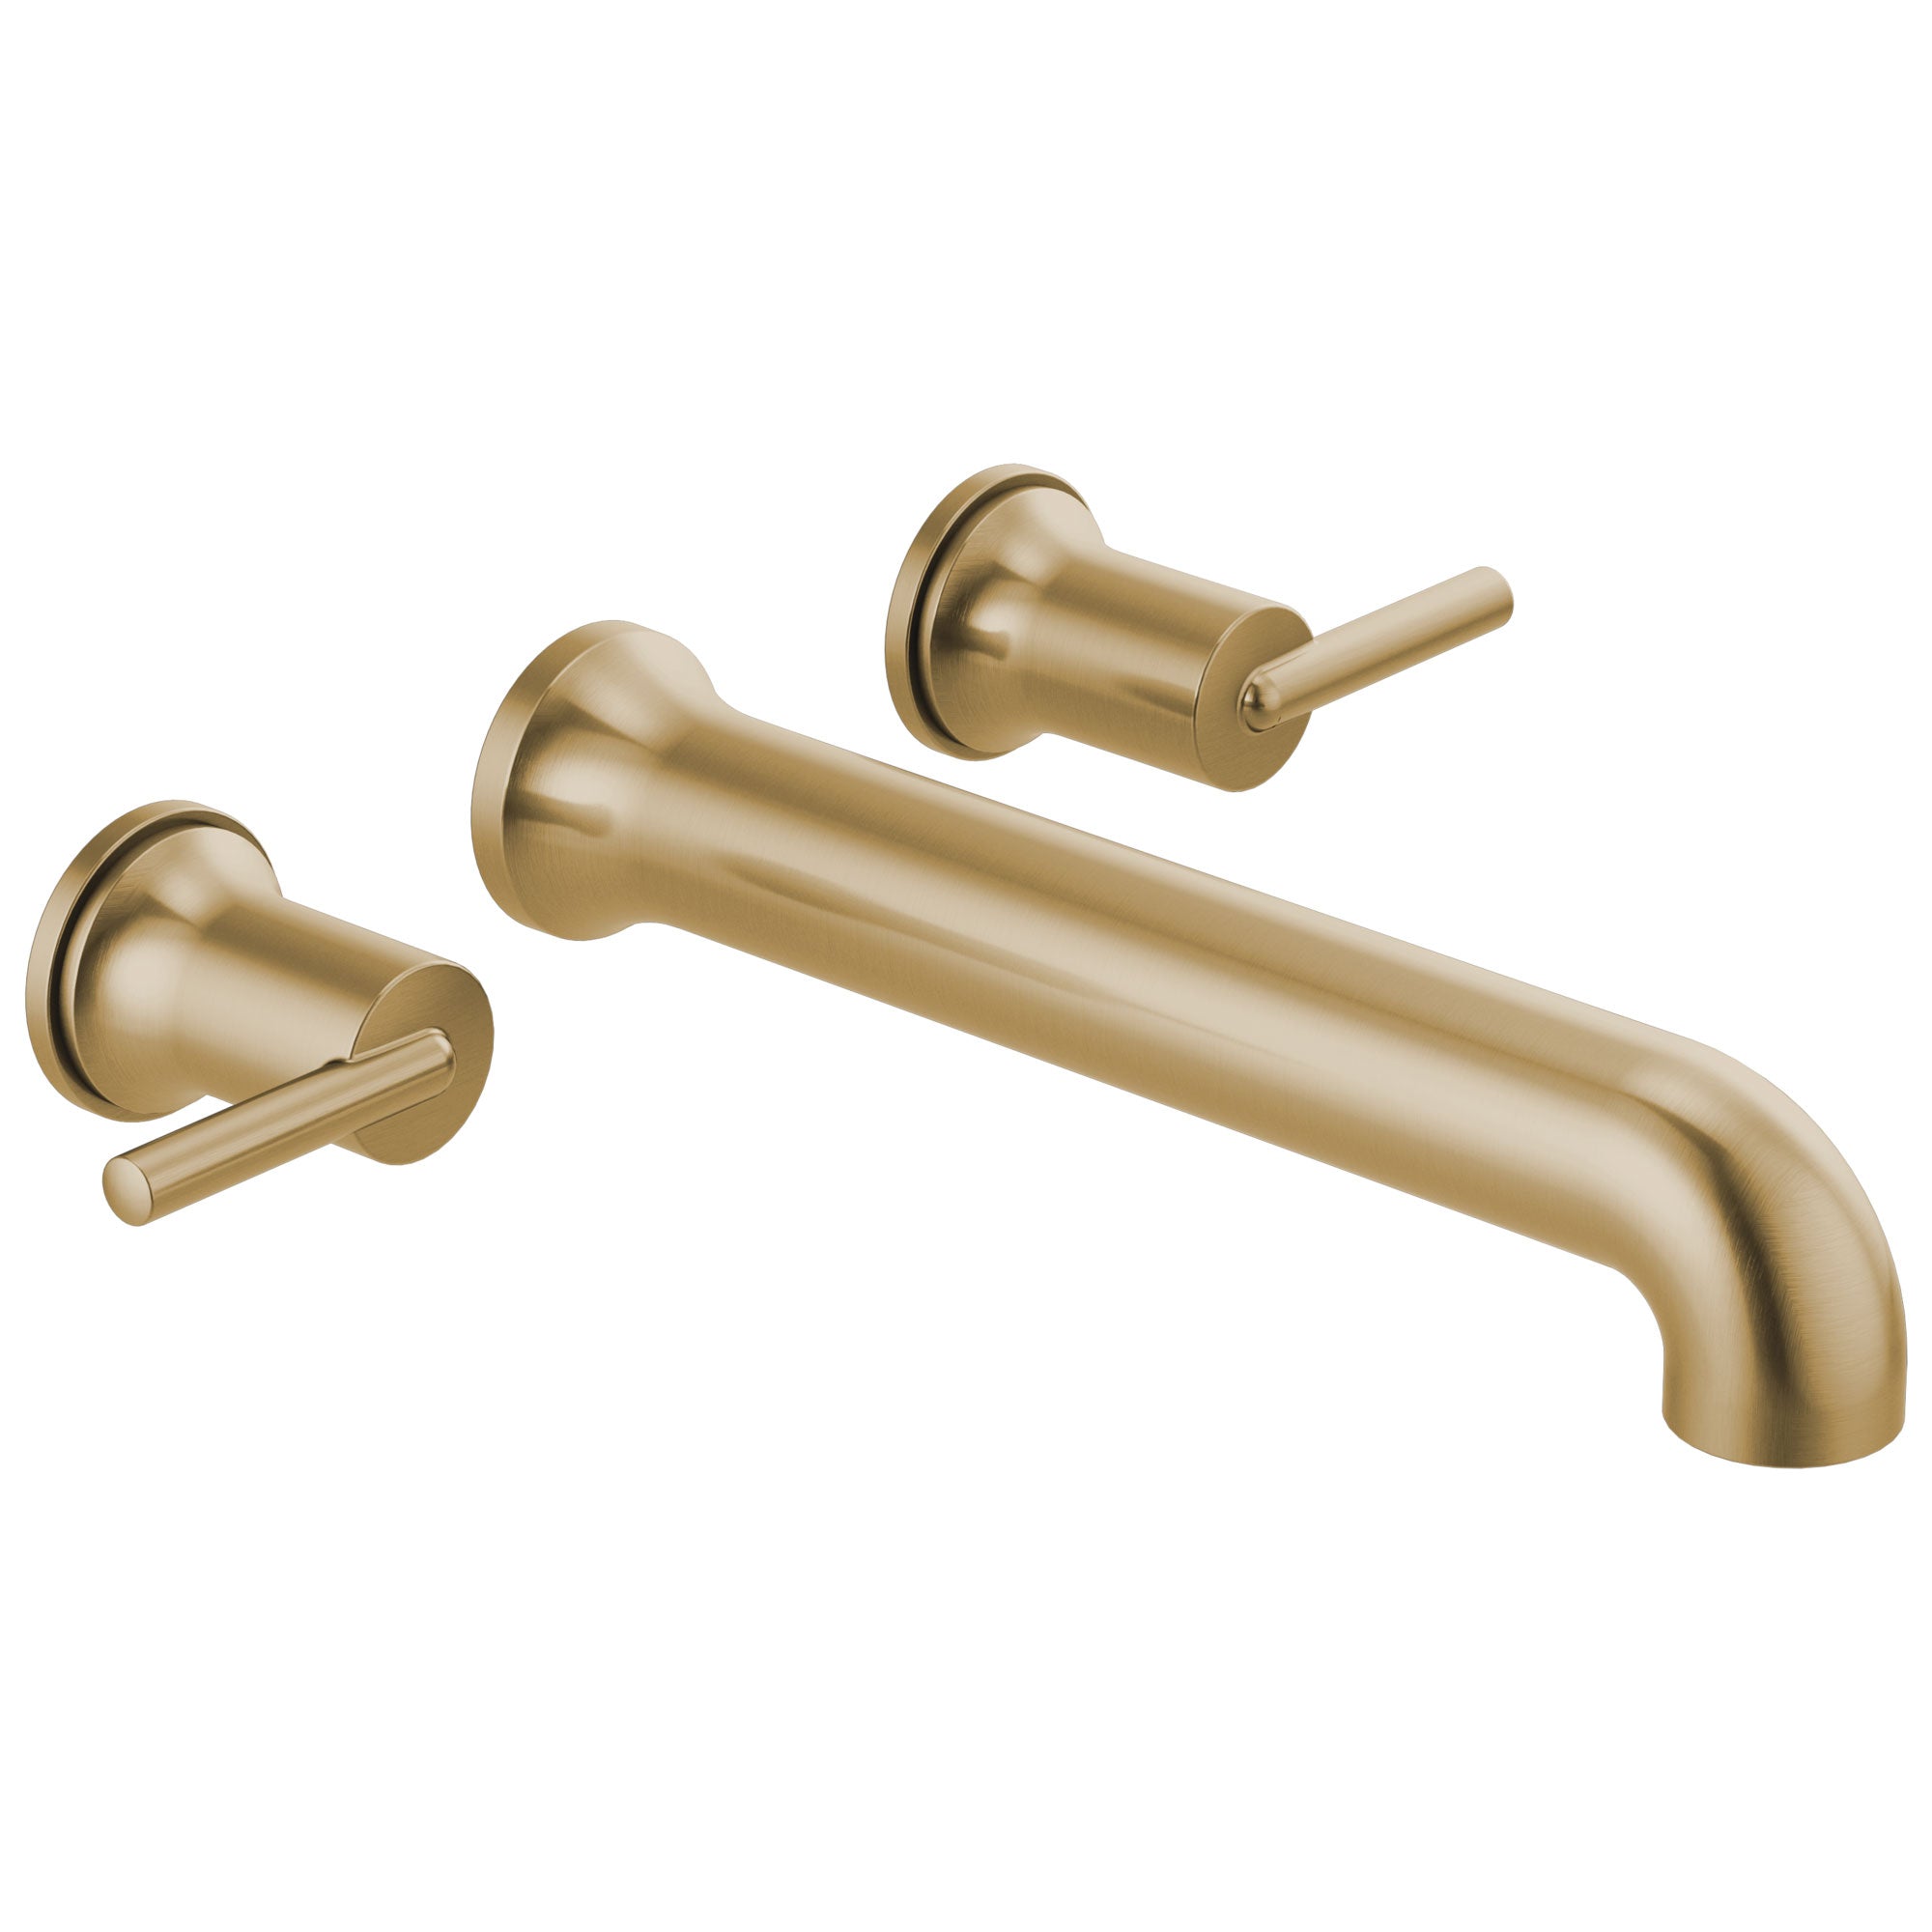 Delta Trinsic Modern Champagne Bronze Finish Wall Mounted Tub Filler Faucet Trim Kit (Requires Valve) DT5759CZWL